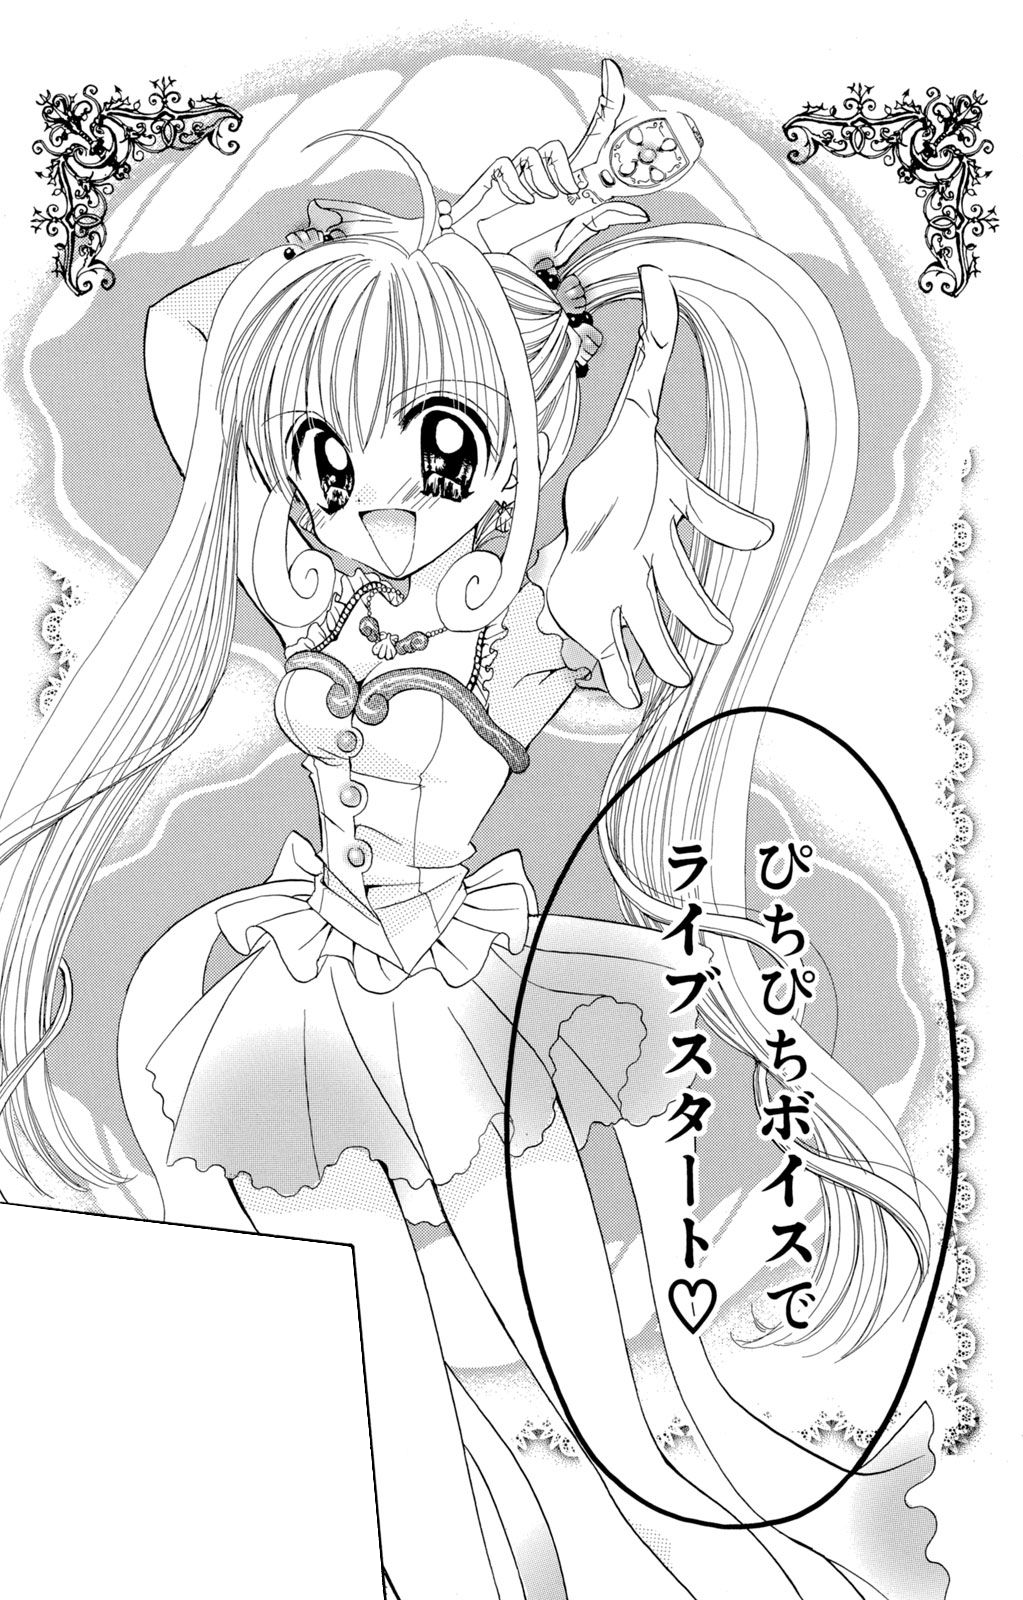 https://static.wikia.nocookie.net/mermaidmelody/images/3/3e/Lucia_Idol_Form_Manga.png/revision/latest?cb=20220628203006